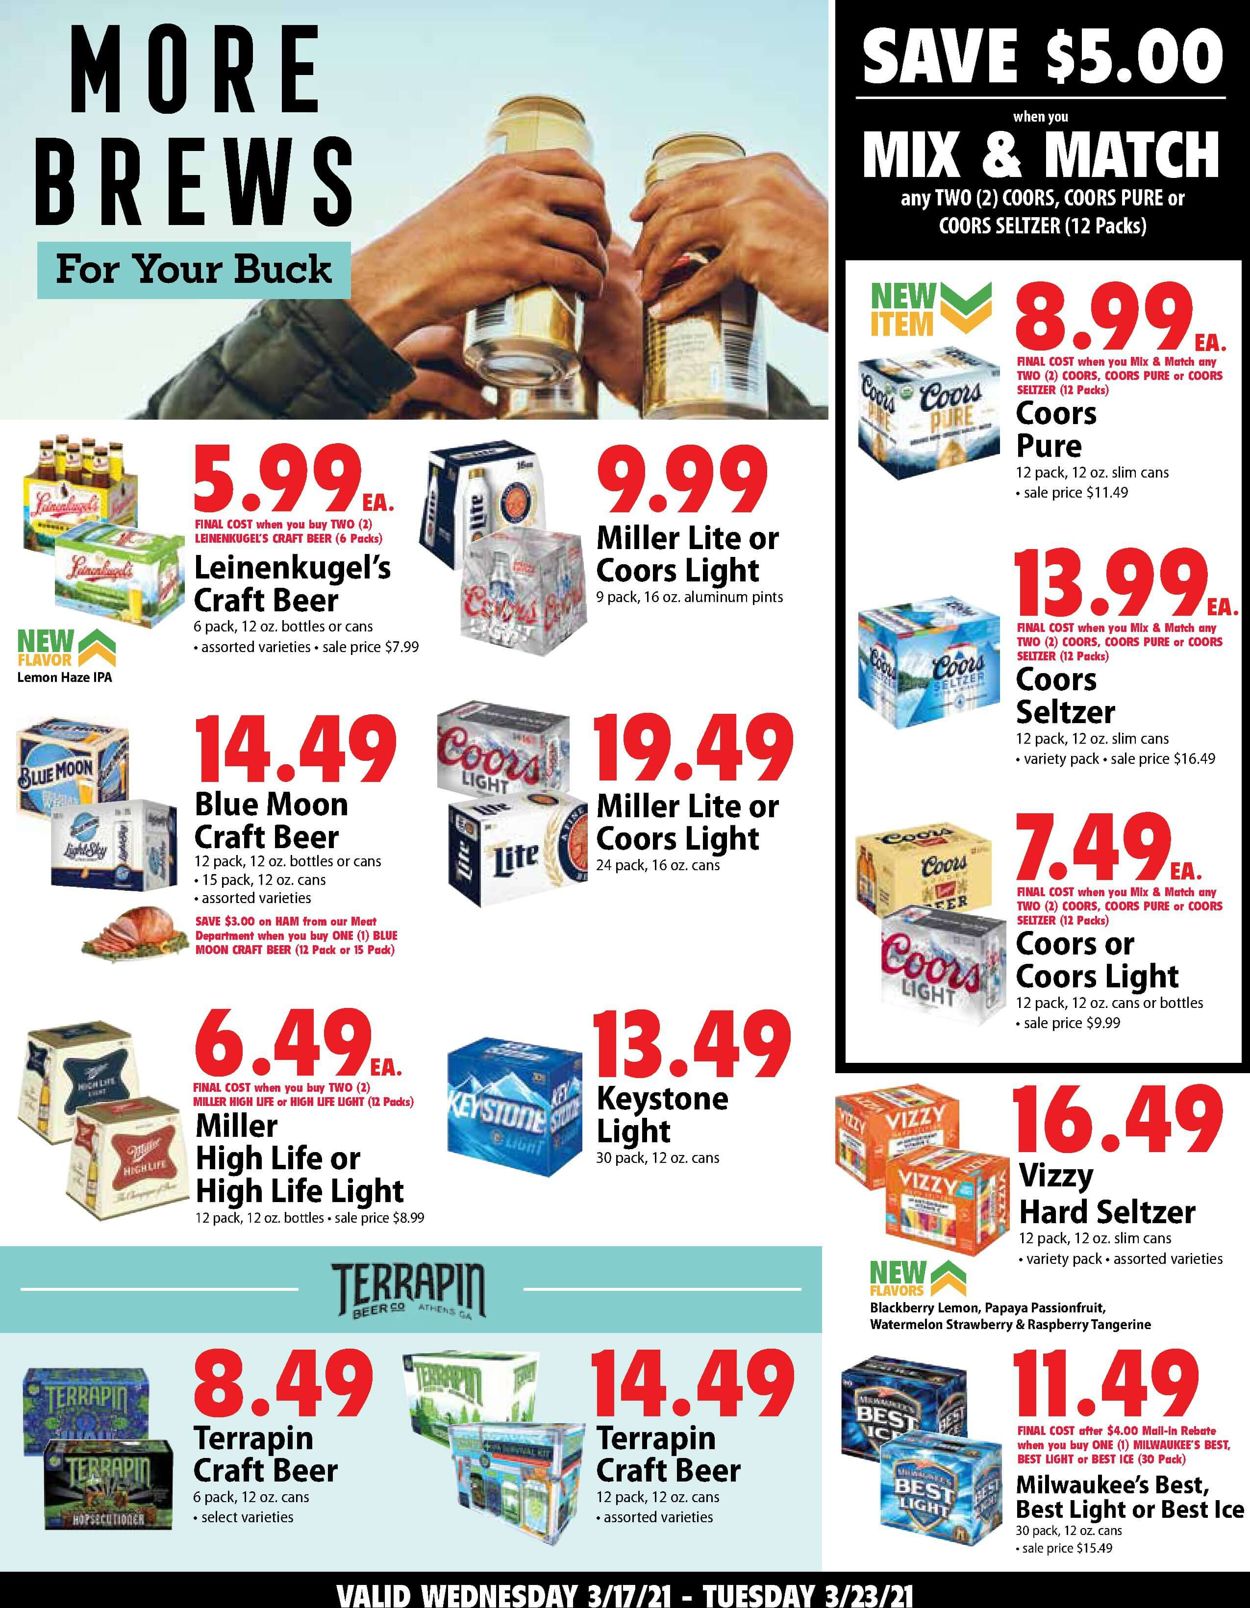 Festival Foods Current weekly ad 03/17 - 03/23/2021 [6] - frequent-ads.com